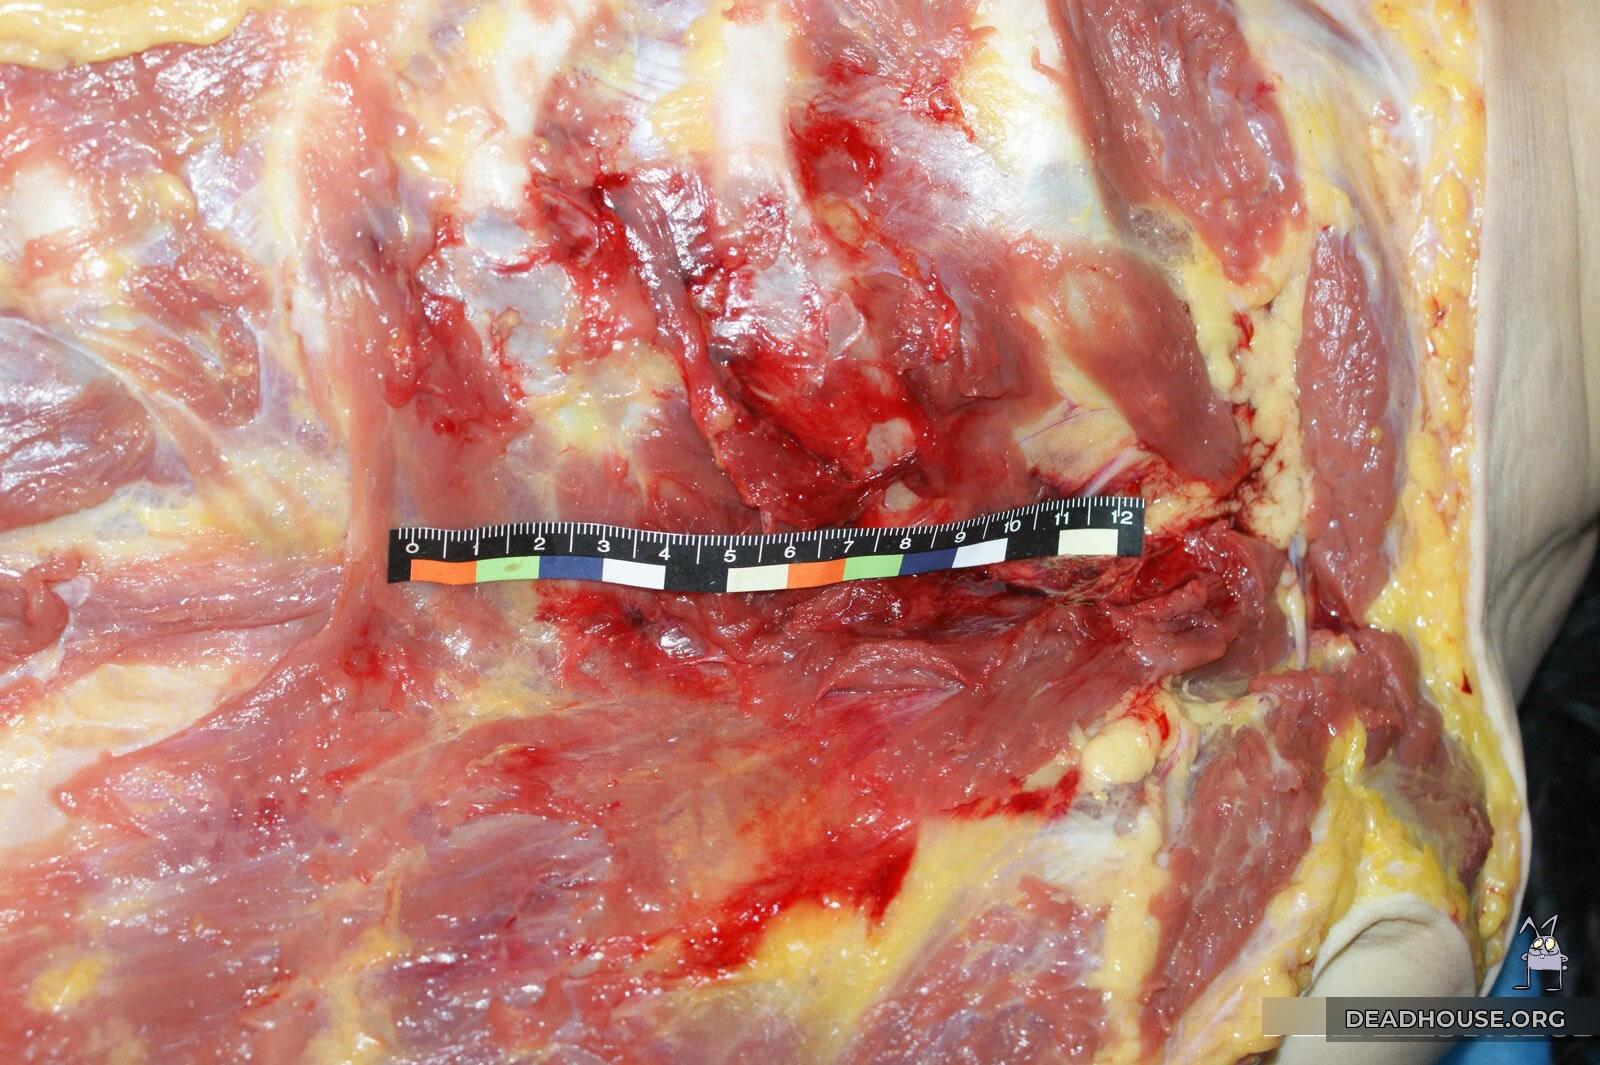 Hemorrhage in the chest area. Measurements